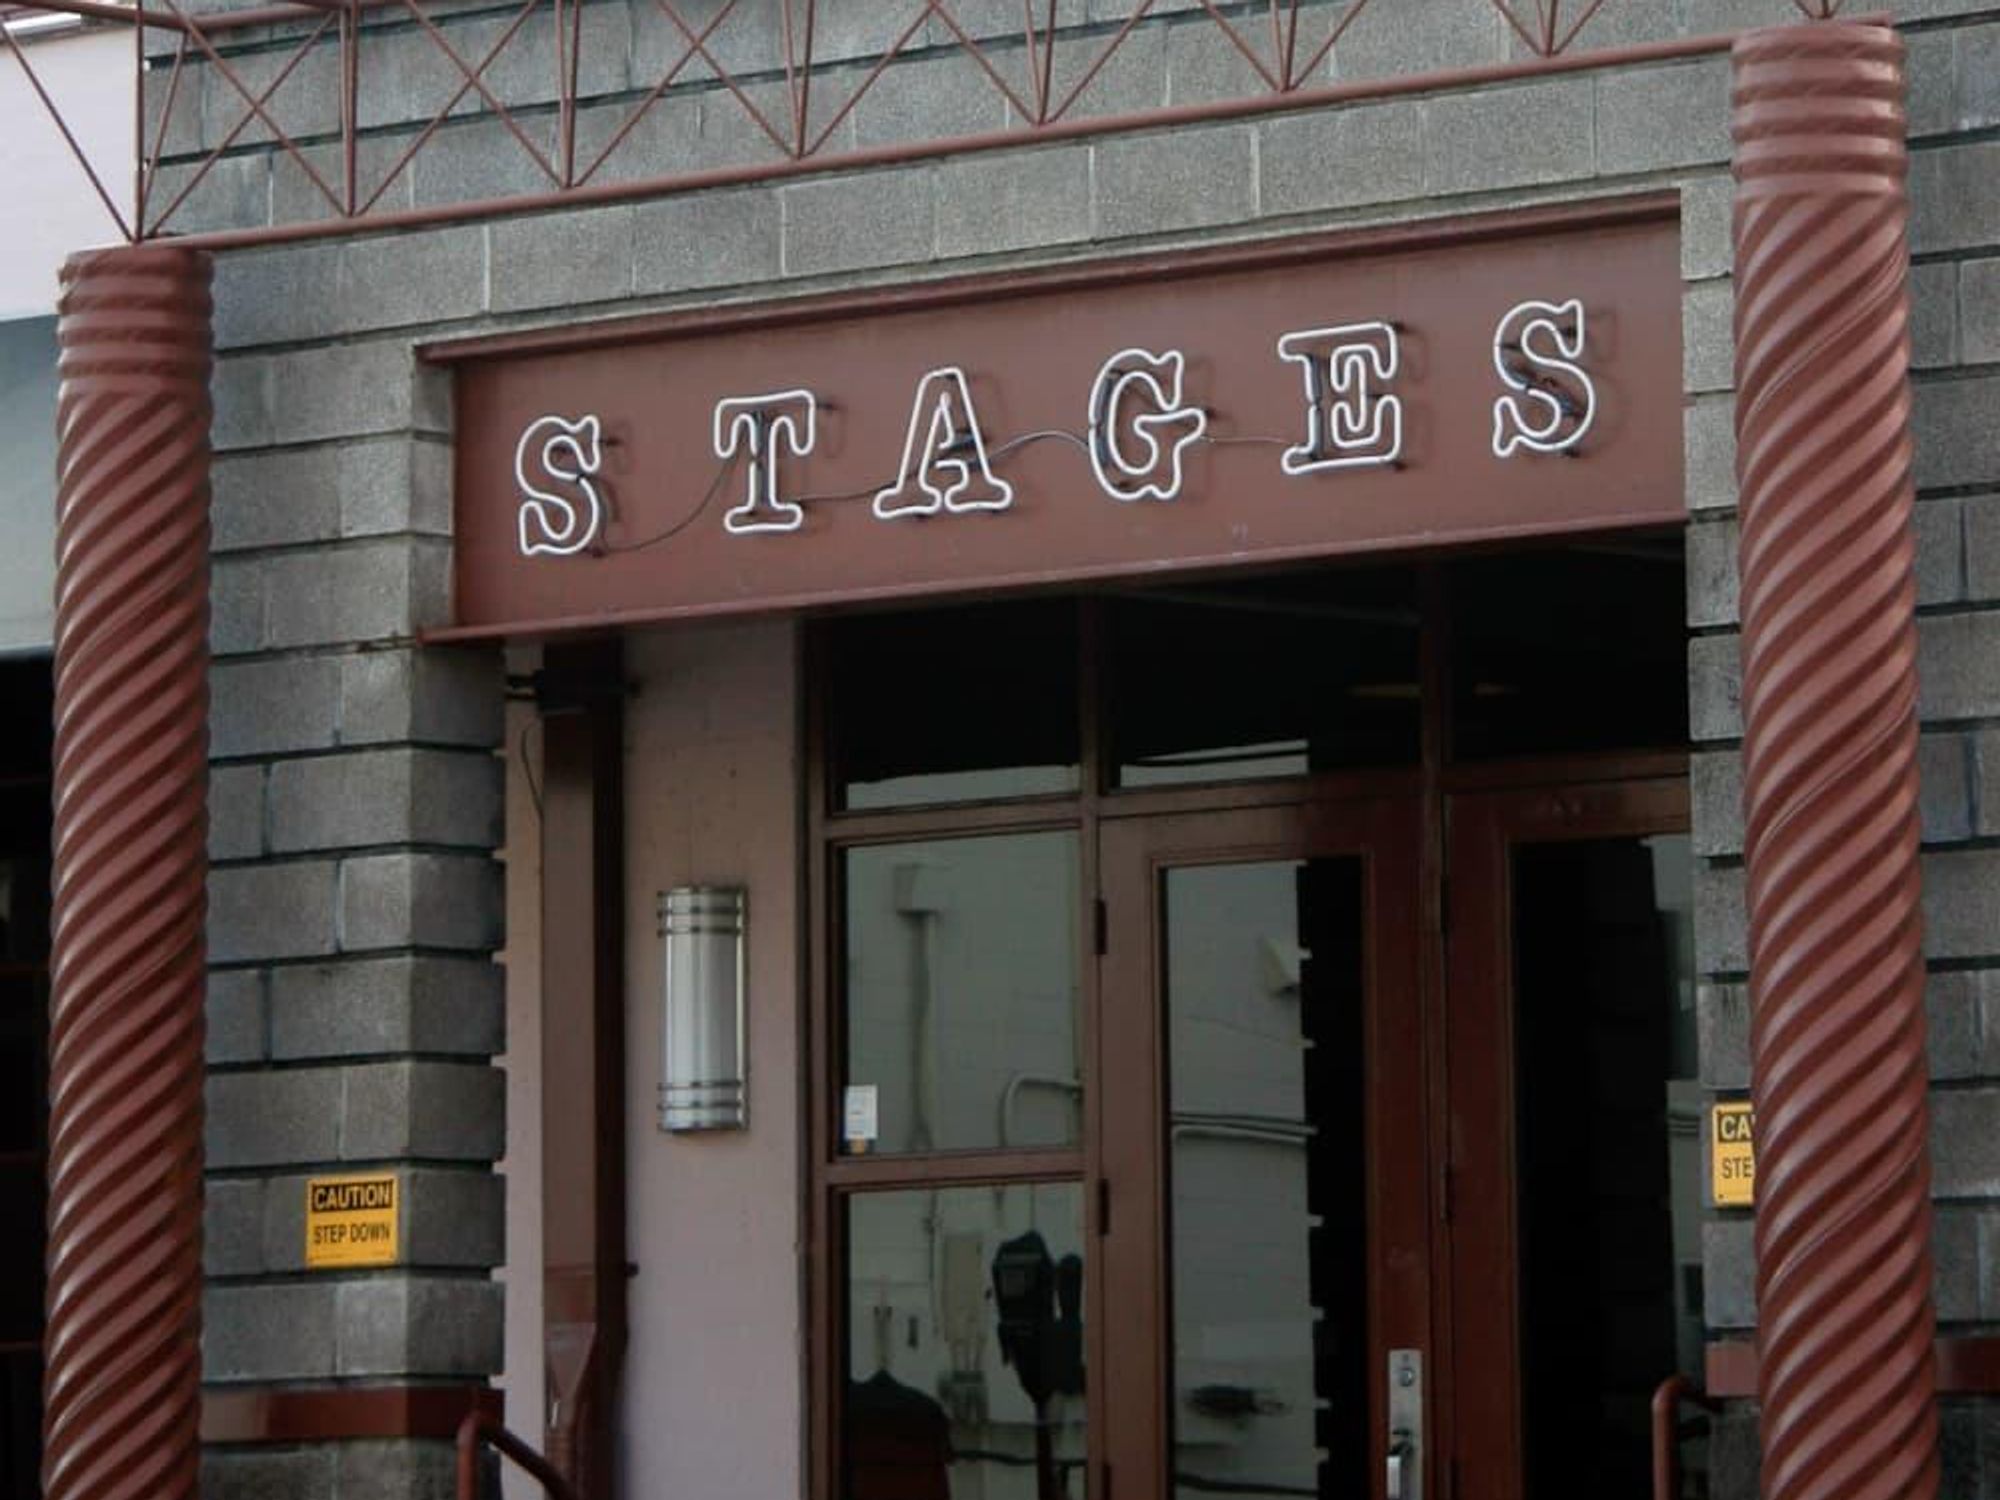 Places_A&E_Stages_Jan. 2010_exterior_day